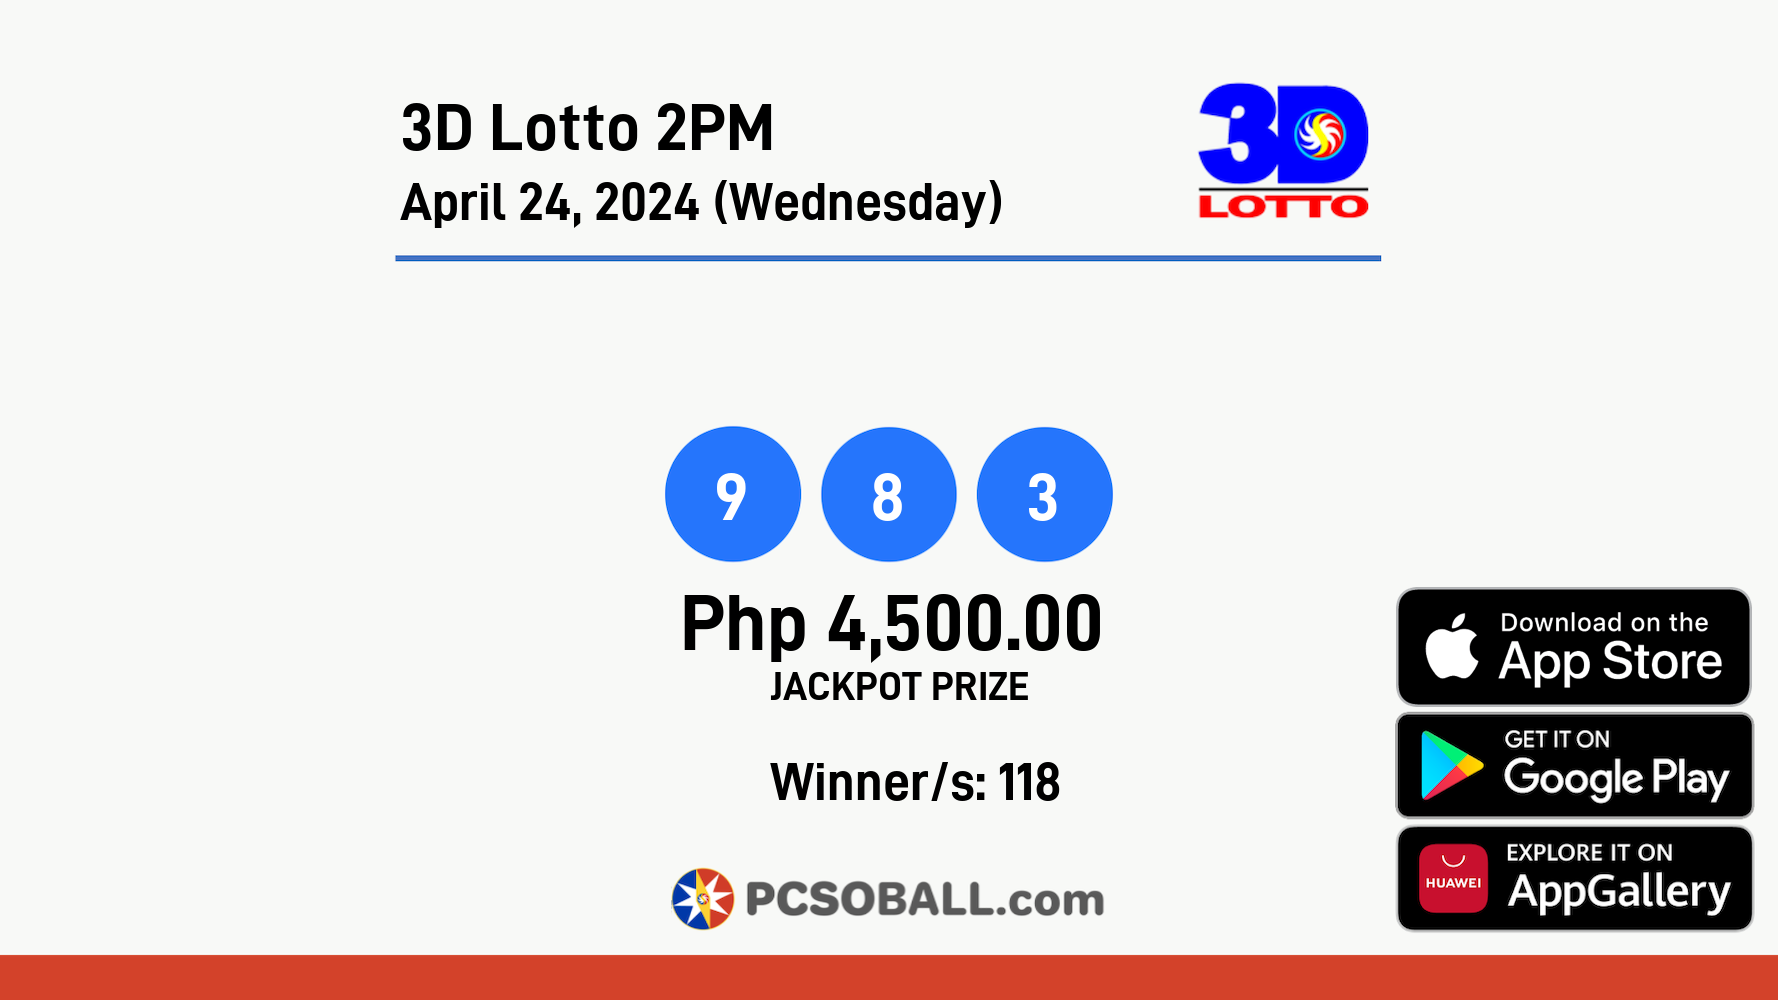 3D Lotto 2PM April 24, 2024 (Wednesday) Result